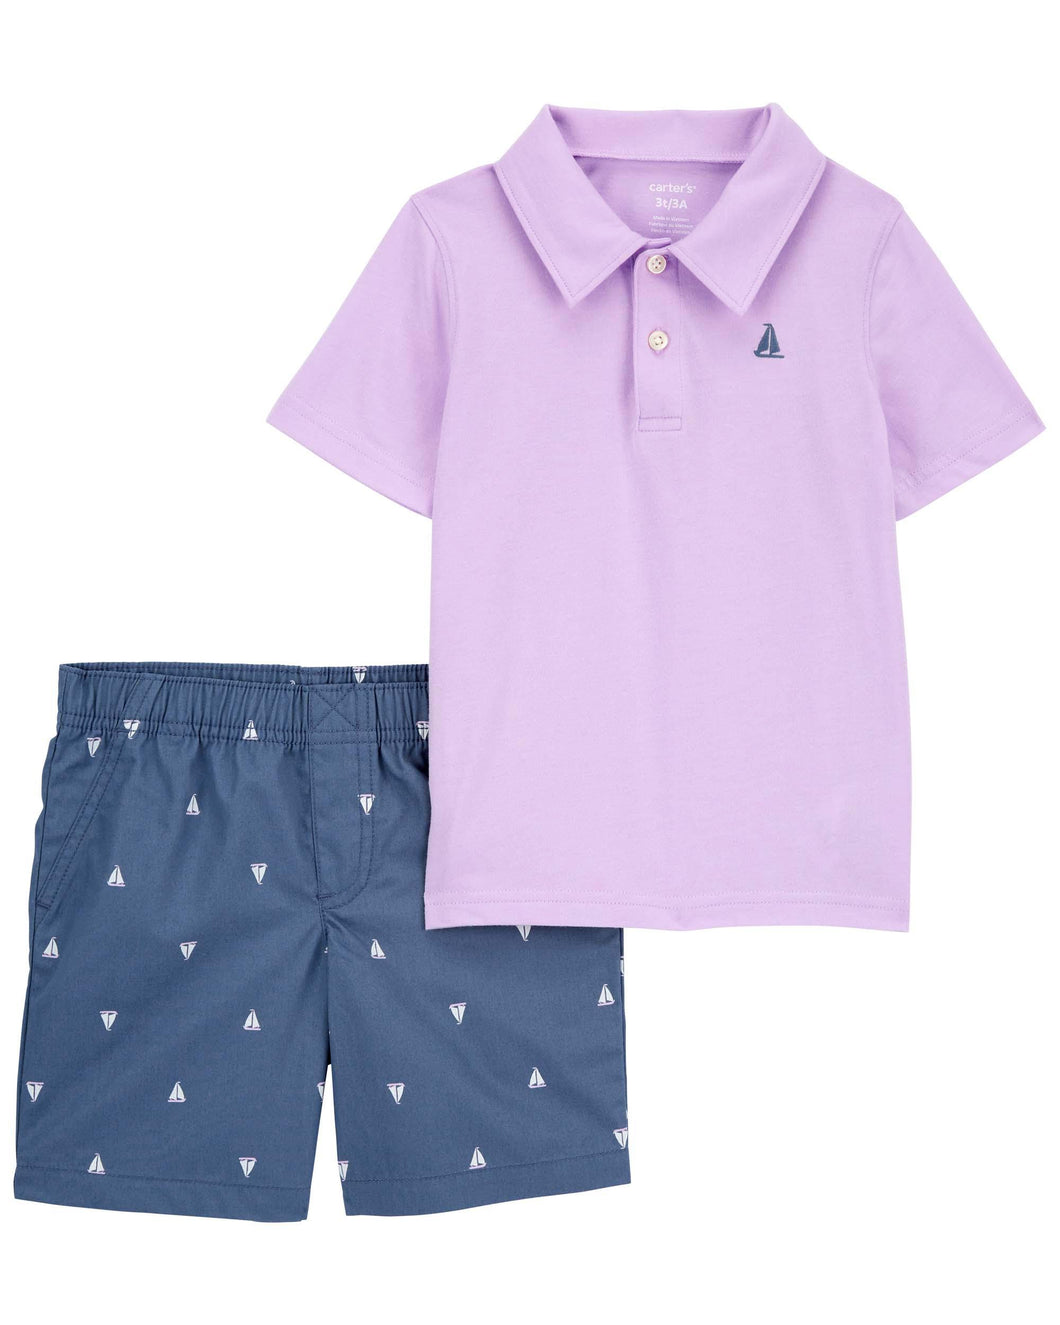 Carter's 2pc Baby Boy Purple Polo and Sailboat Shorts Set